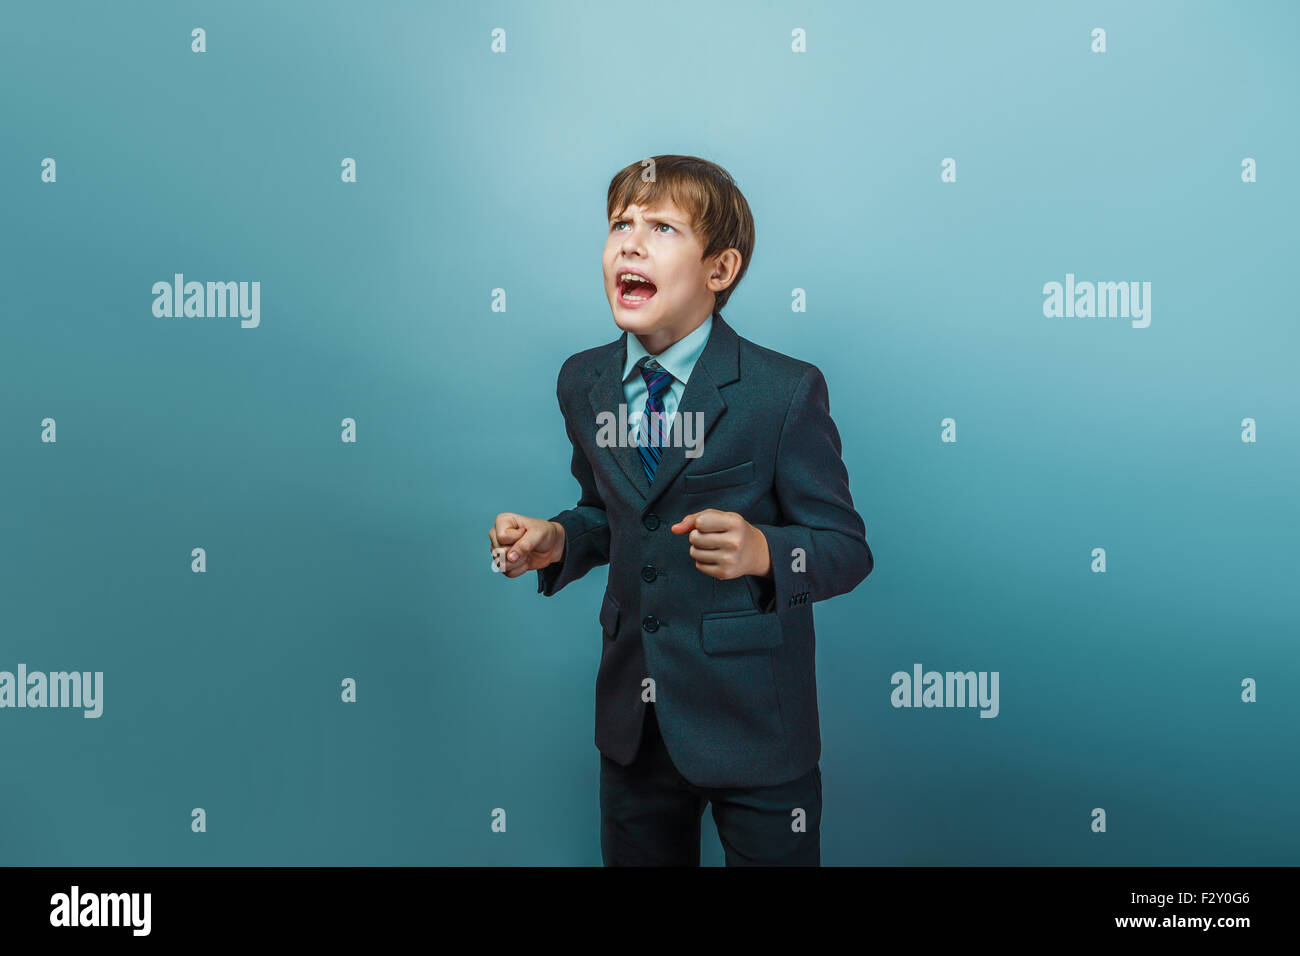 a  boy of twelve  European appearance in a suit shouting angry on a gray background Stock Photo